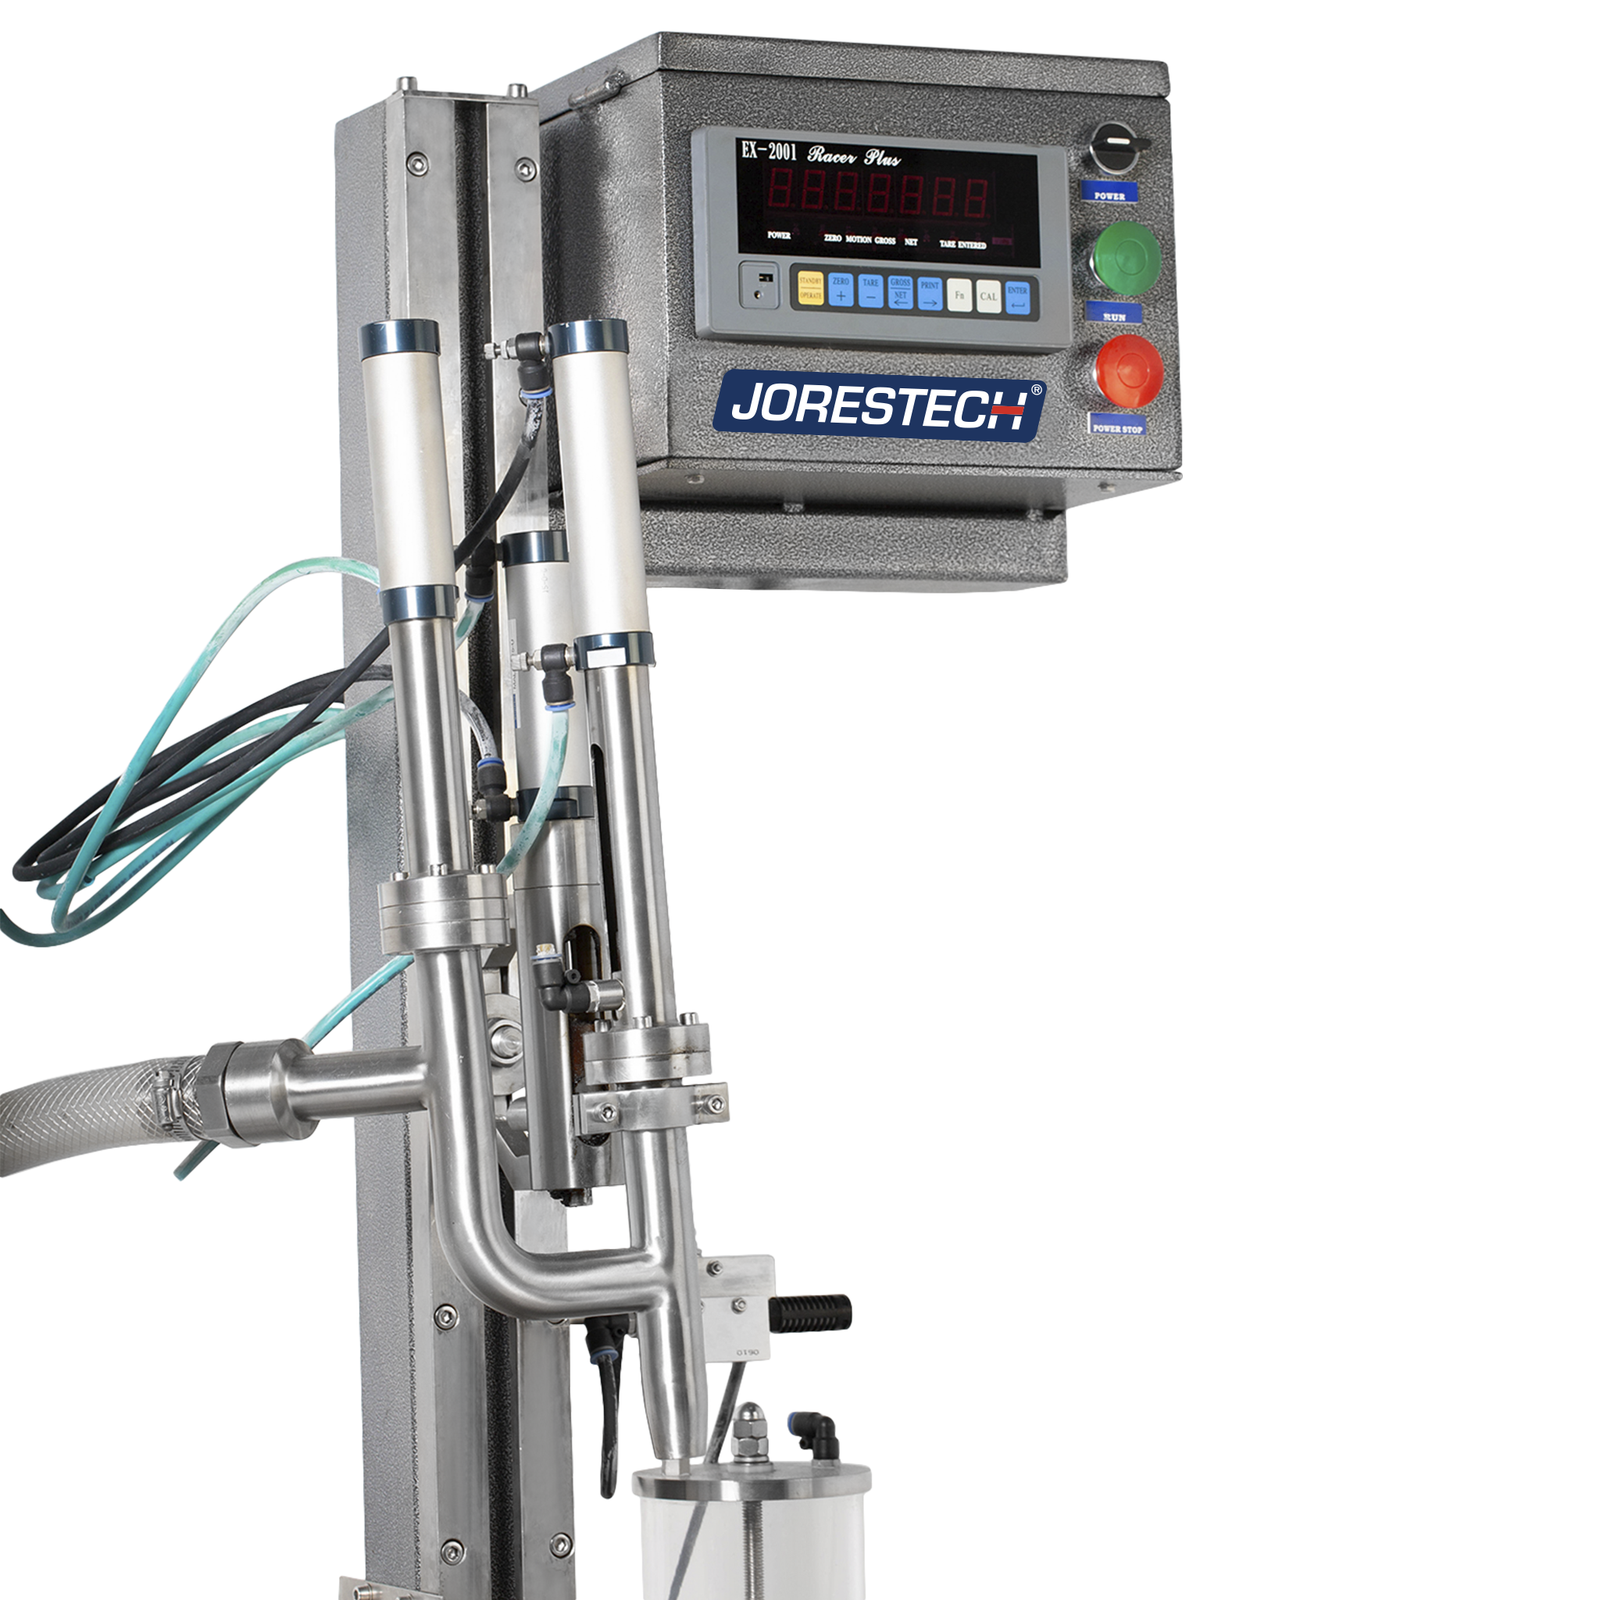 Closeup shows the digital control panel, the height adjustment vertical tower, compressed air hose system, and the liquid dispensing nozzle of the JORES TECHNOLOGIES® liquid net weight filler.